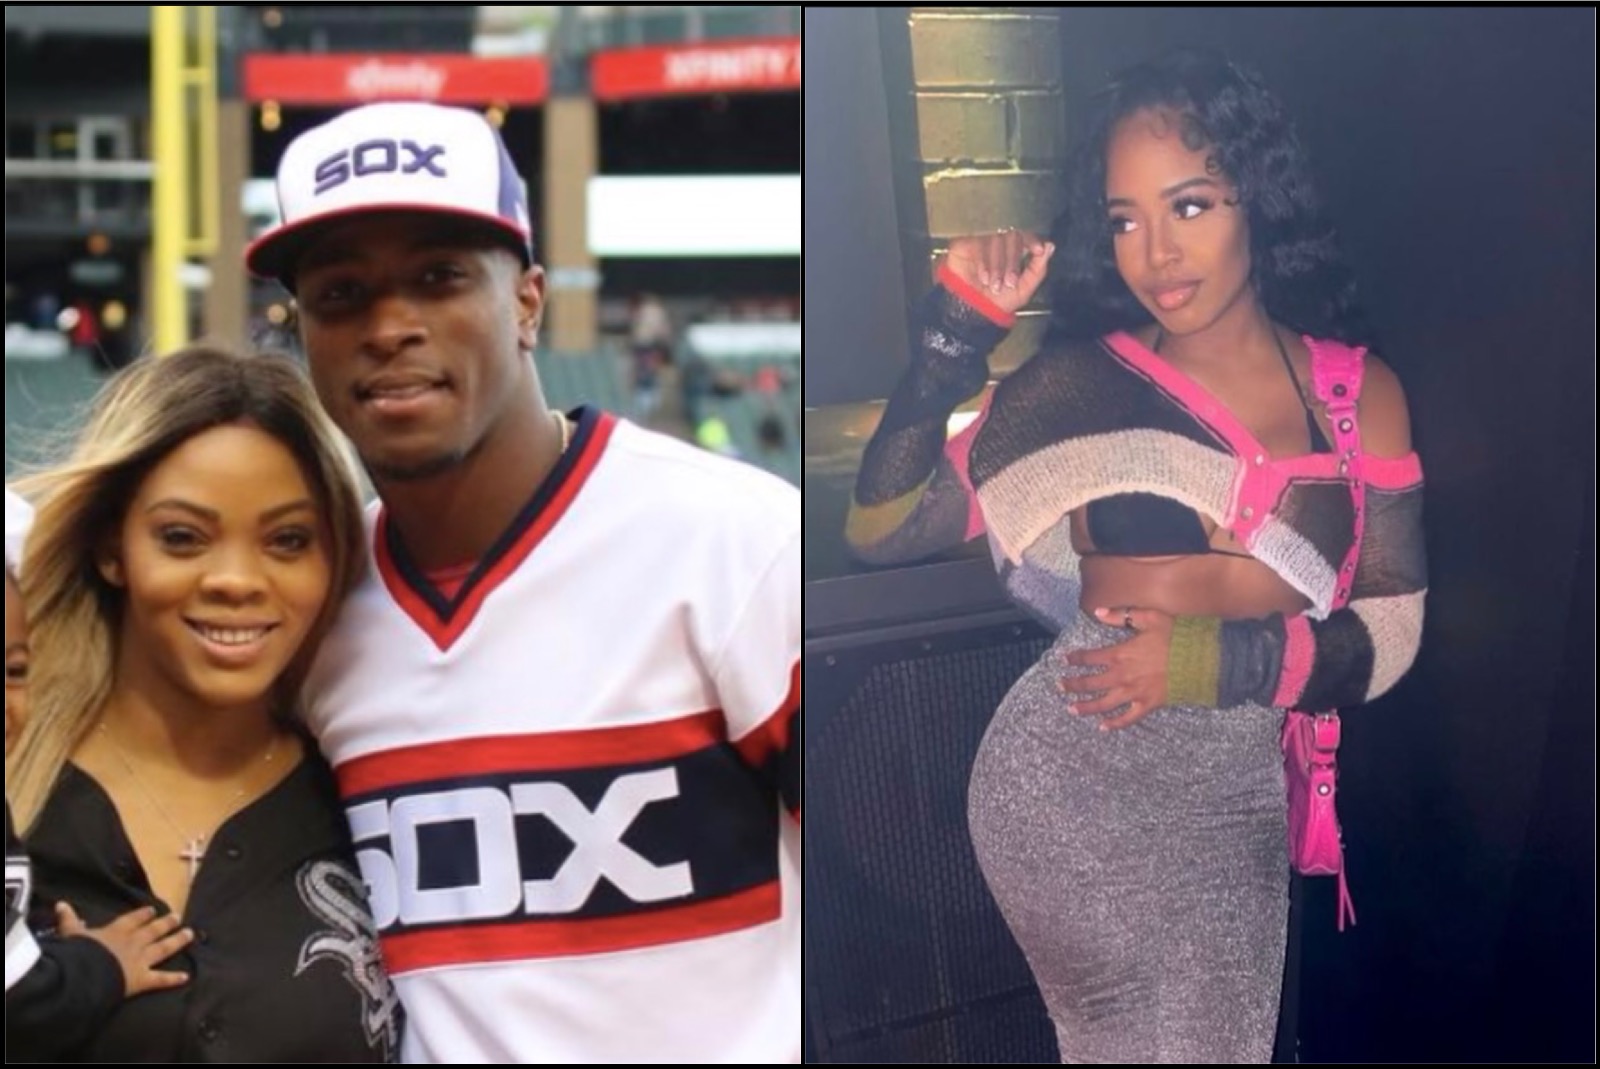 Tim Anderson's Wife Bria Confirms She's Sticking By His Side